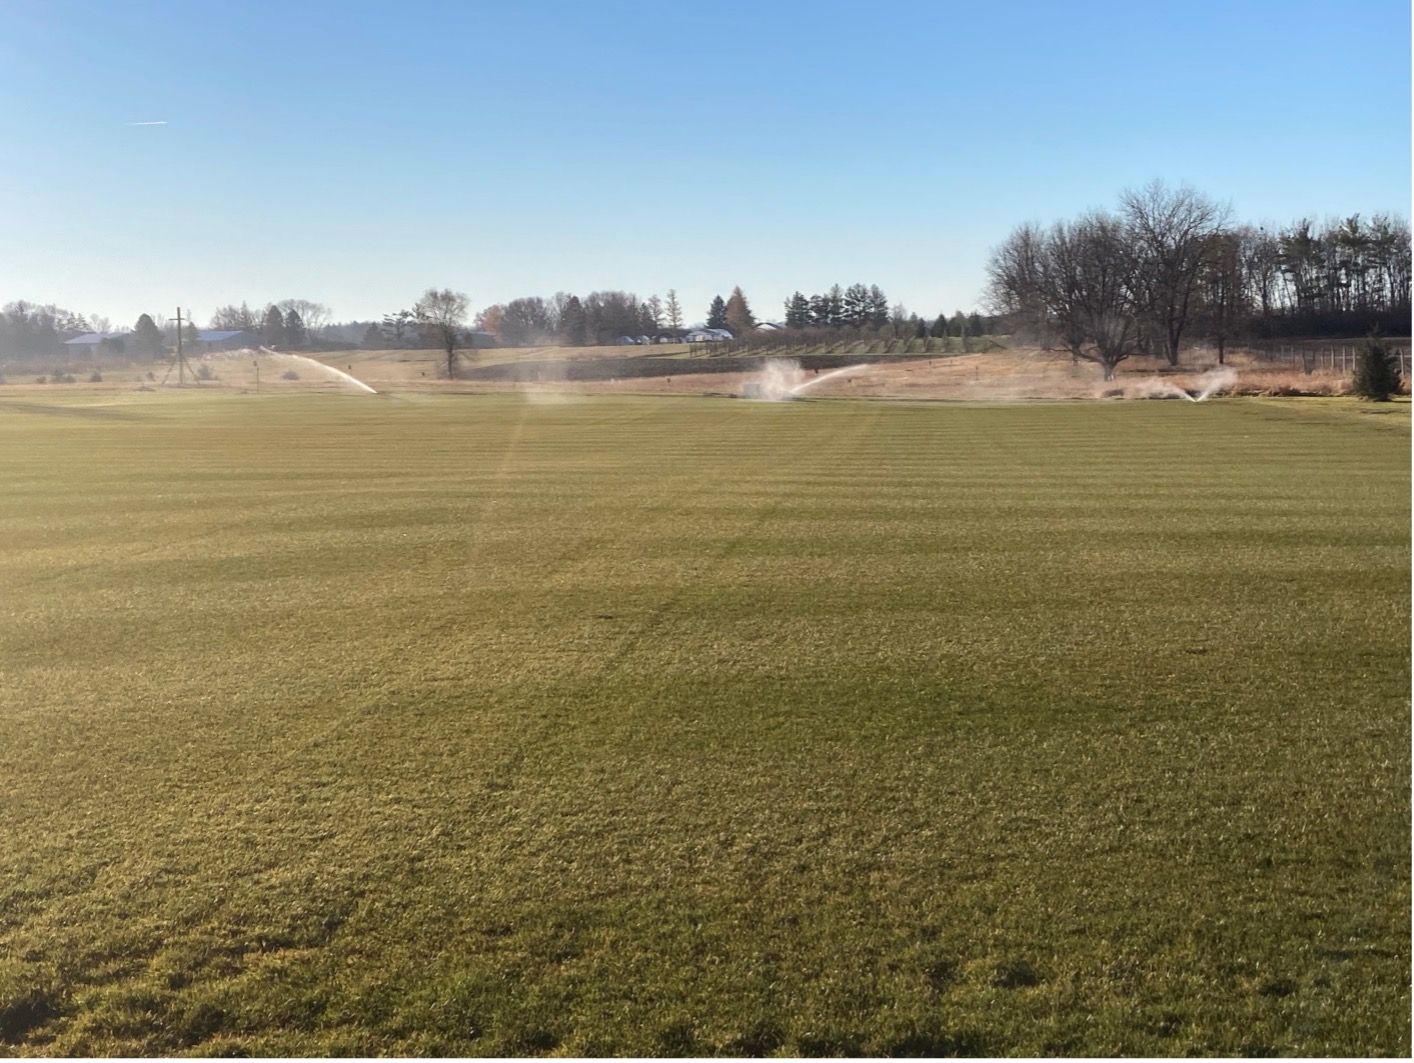 The sod field during irrigation blowout on December 1, 2021. 